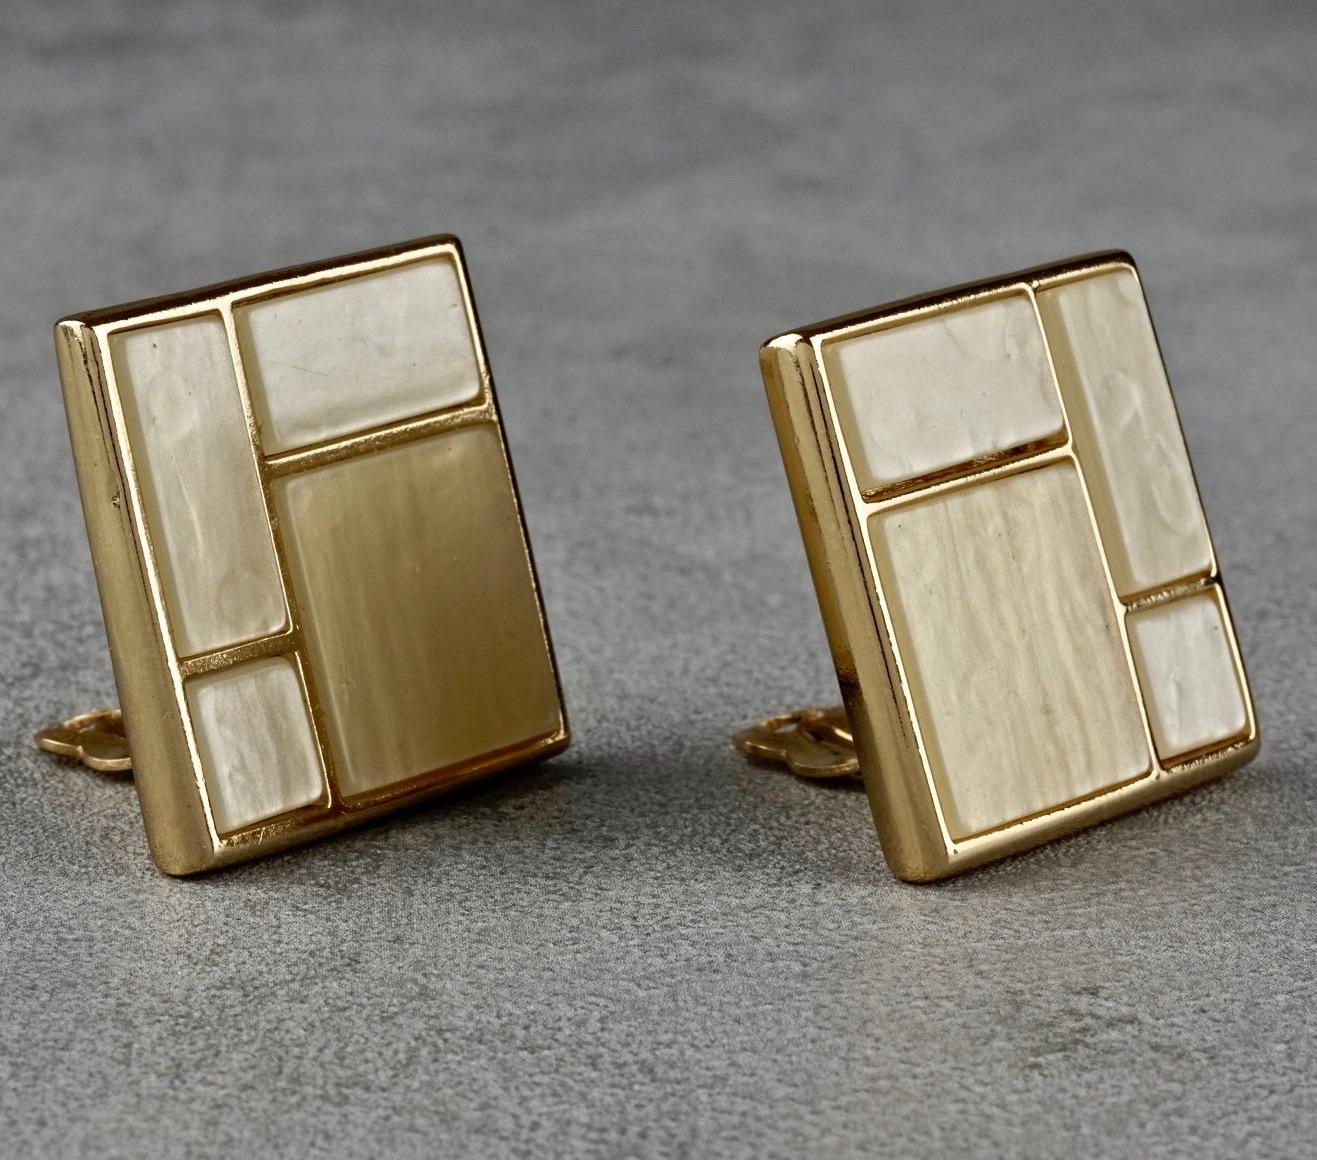 Vintage YVES SAINT LAURENT Ysl Mother of Pearl Mondrian Earrings

Measurements:
Height: 1.26 inches (3.2 cm)
Width: 1.26 inches (3.2 cm)
Weight per Earring: 20 grams

Features:
- 100% Authentic YVES SAINT LAURENT.
- Square earrings in Piet Mondrian